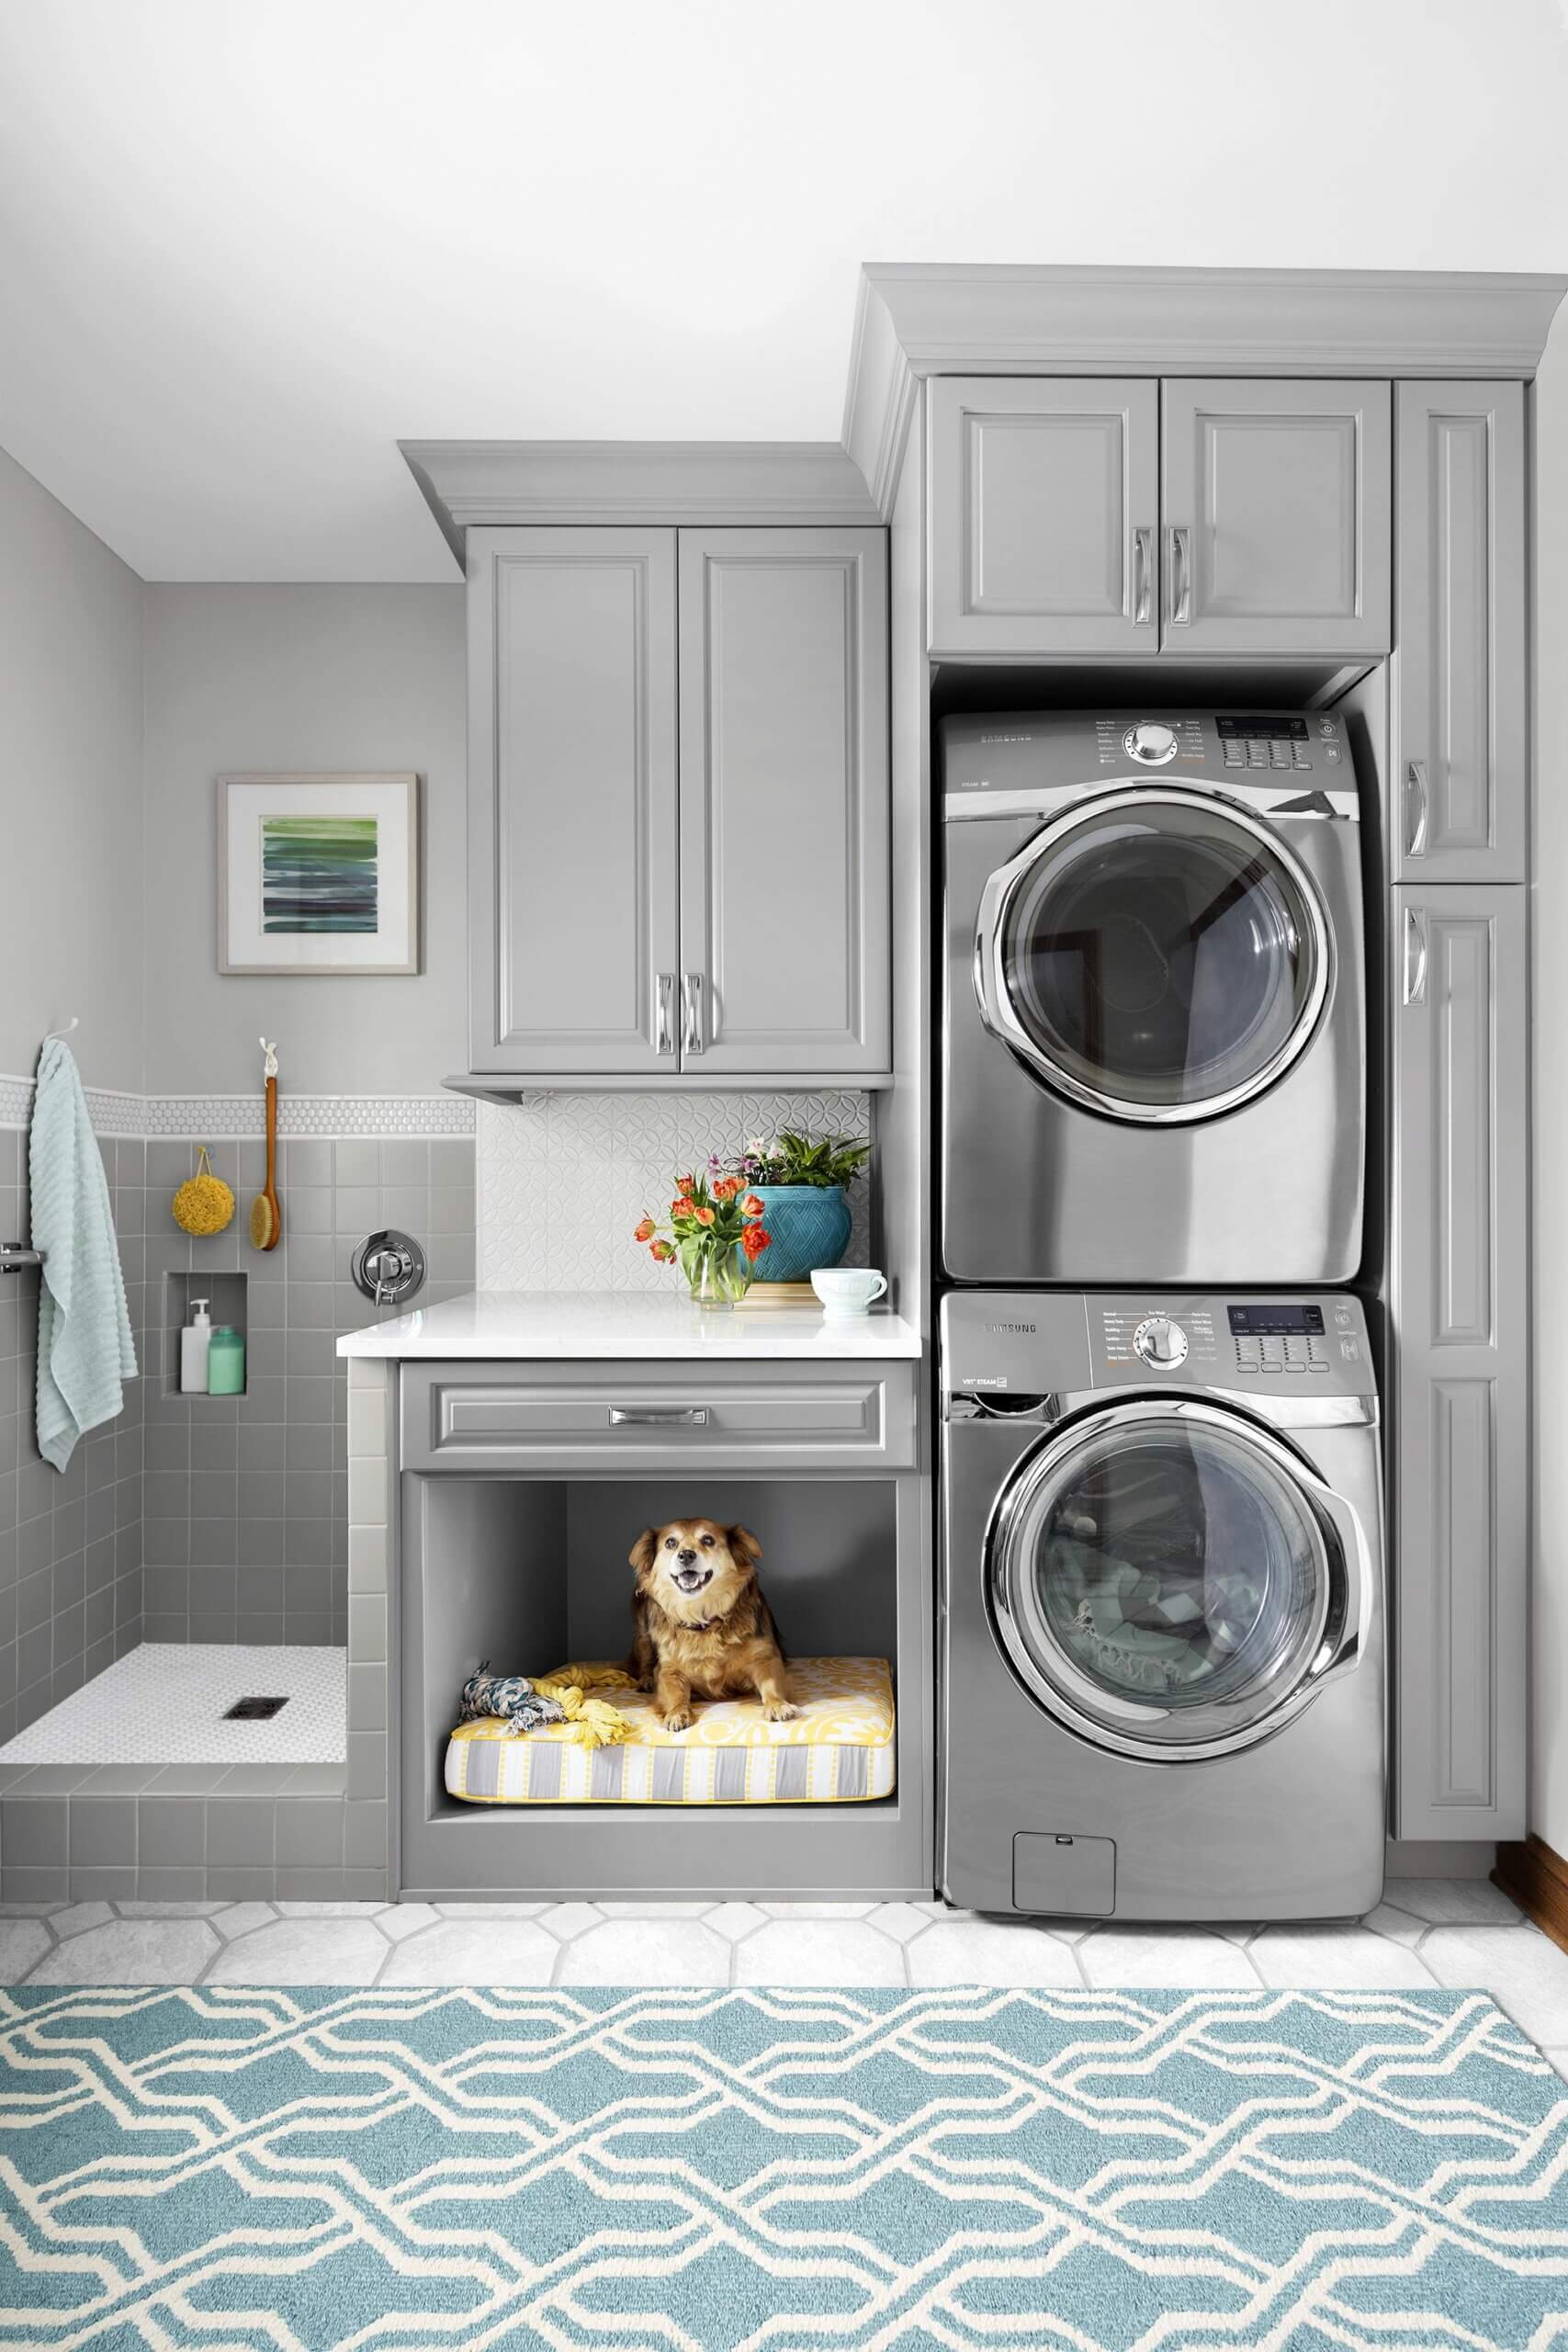 A practical laundry room in the bathroom.